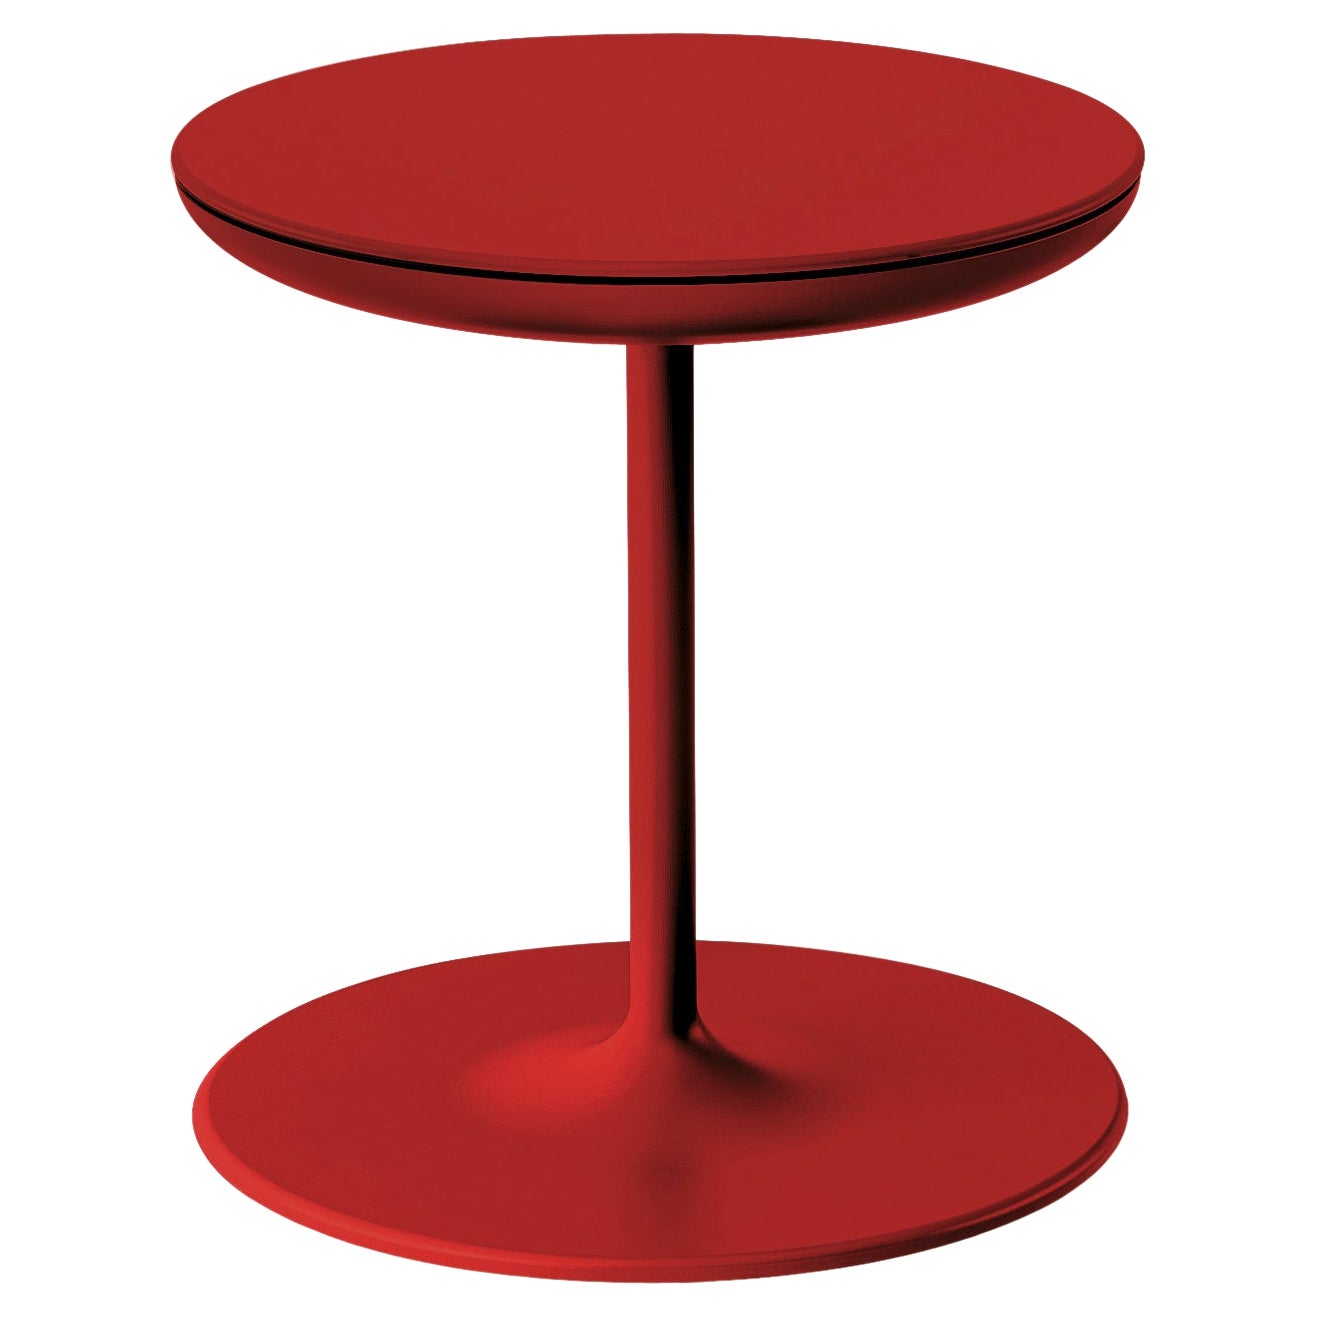 Zanotta Toi Small Table in Red Finish with Plywood Top by Salvatore Indriolo